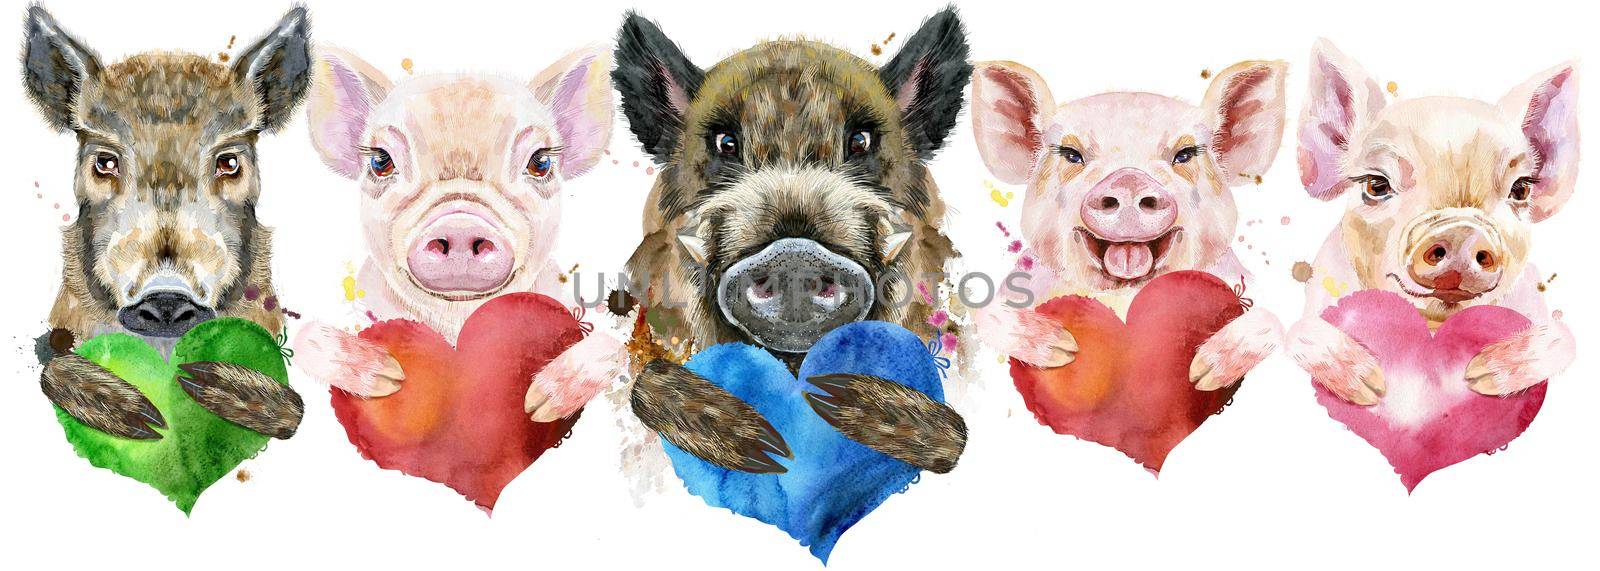 Border from pigs with hearts. Watercolor portraits of pigs and boars by NataOmsk